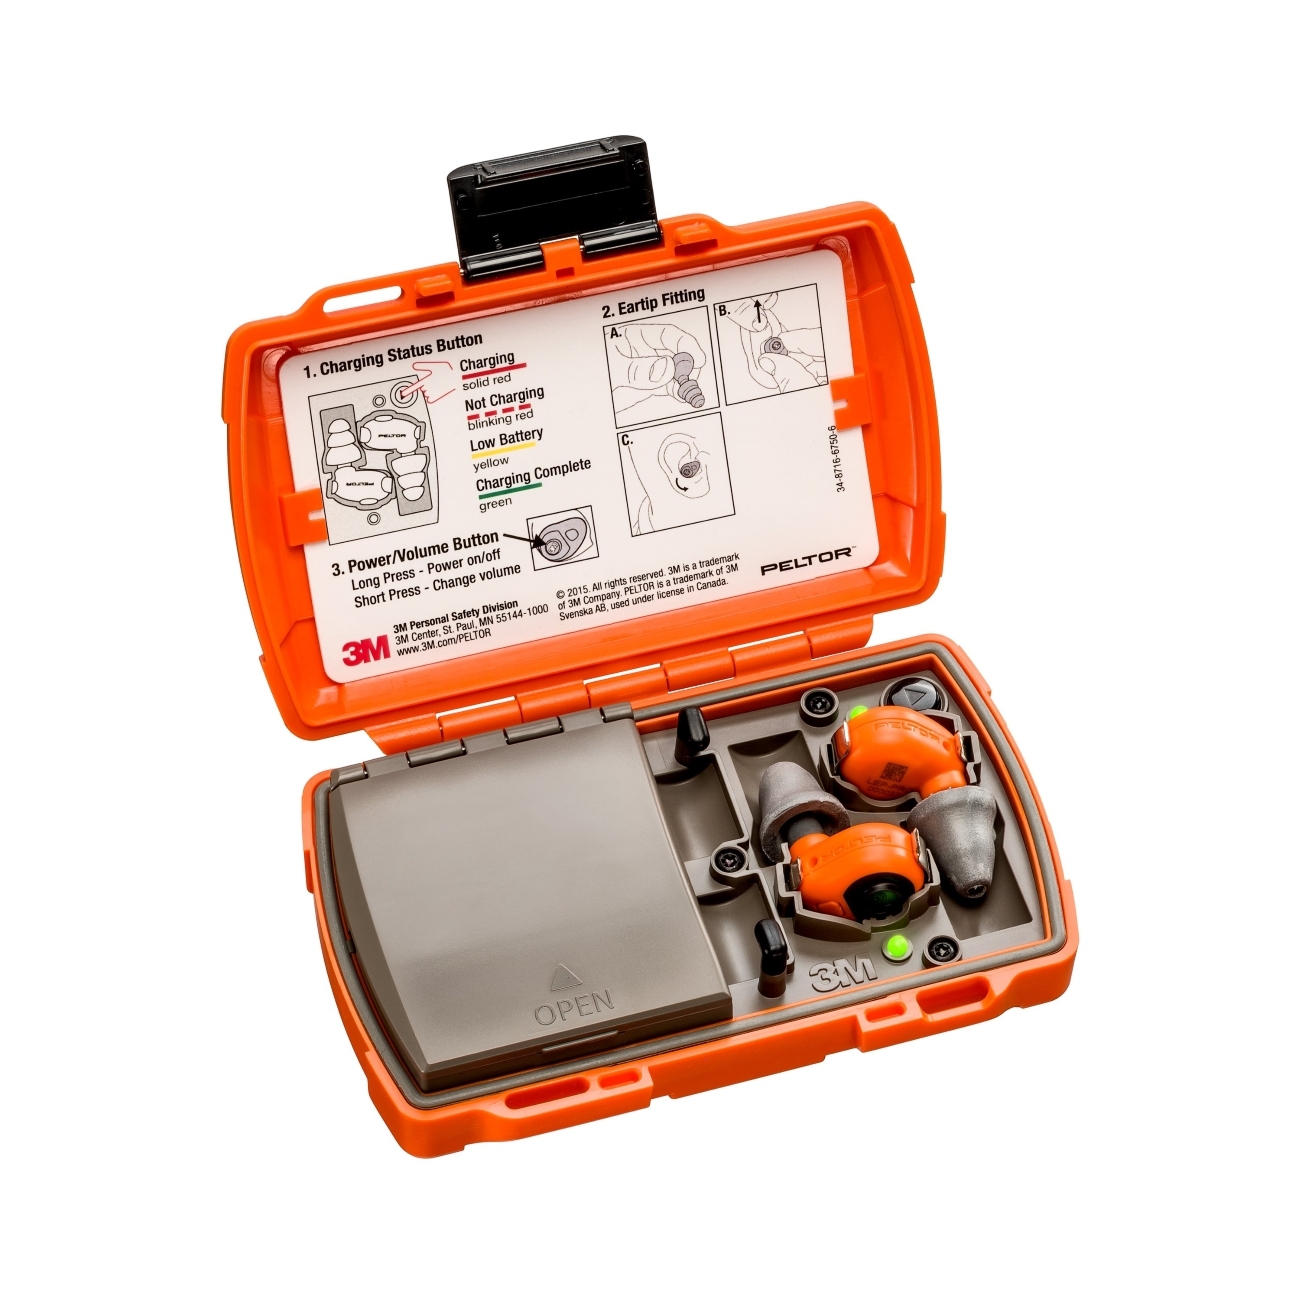 3M PELTOR LEP-200 EU orange with additional antenna for cordless reception of audio signals, set: earplugs and charging station (with closed lid and USB ports) are IP-54 rated and waterproof (30 min. immersion to a depth of 1m)